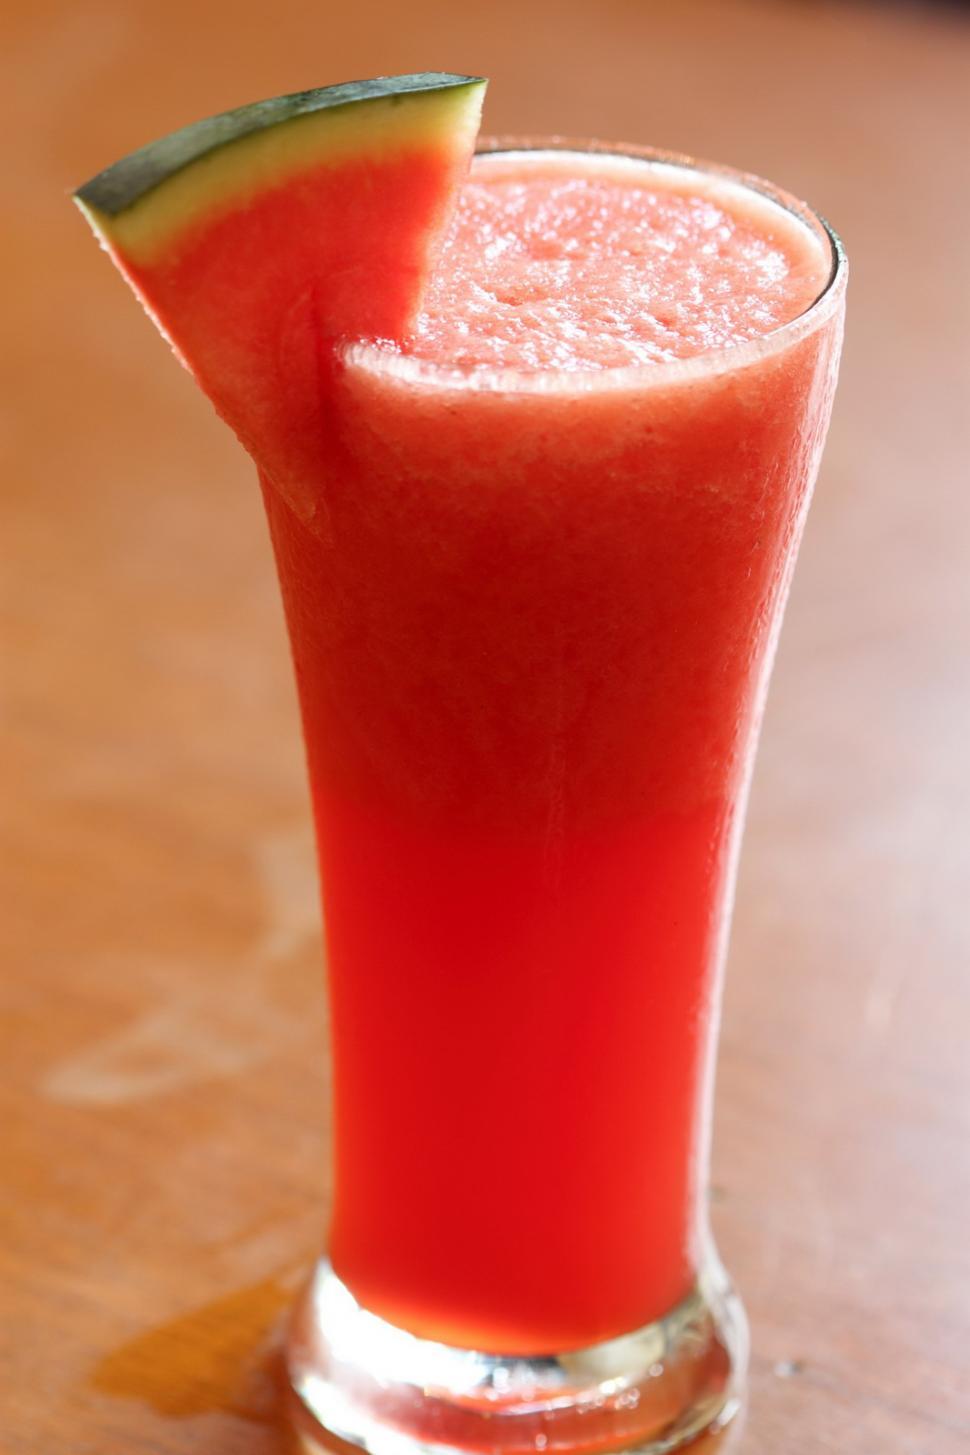 Free Image of Refreshing Watermelon Drink in Glass on Table 